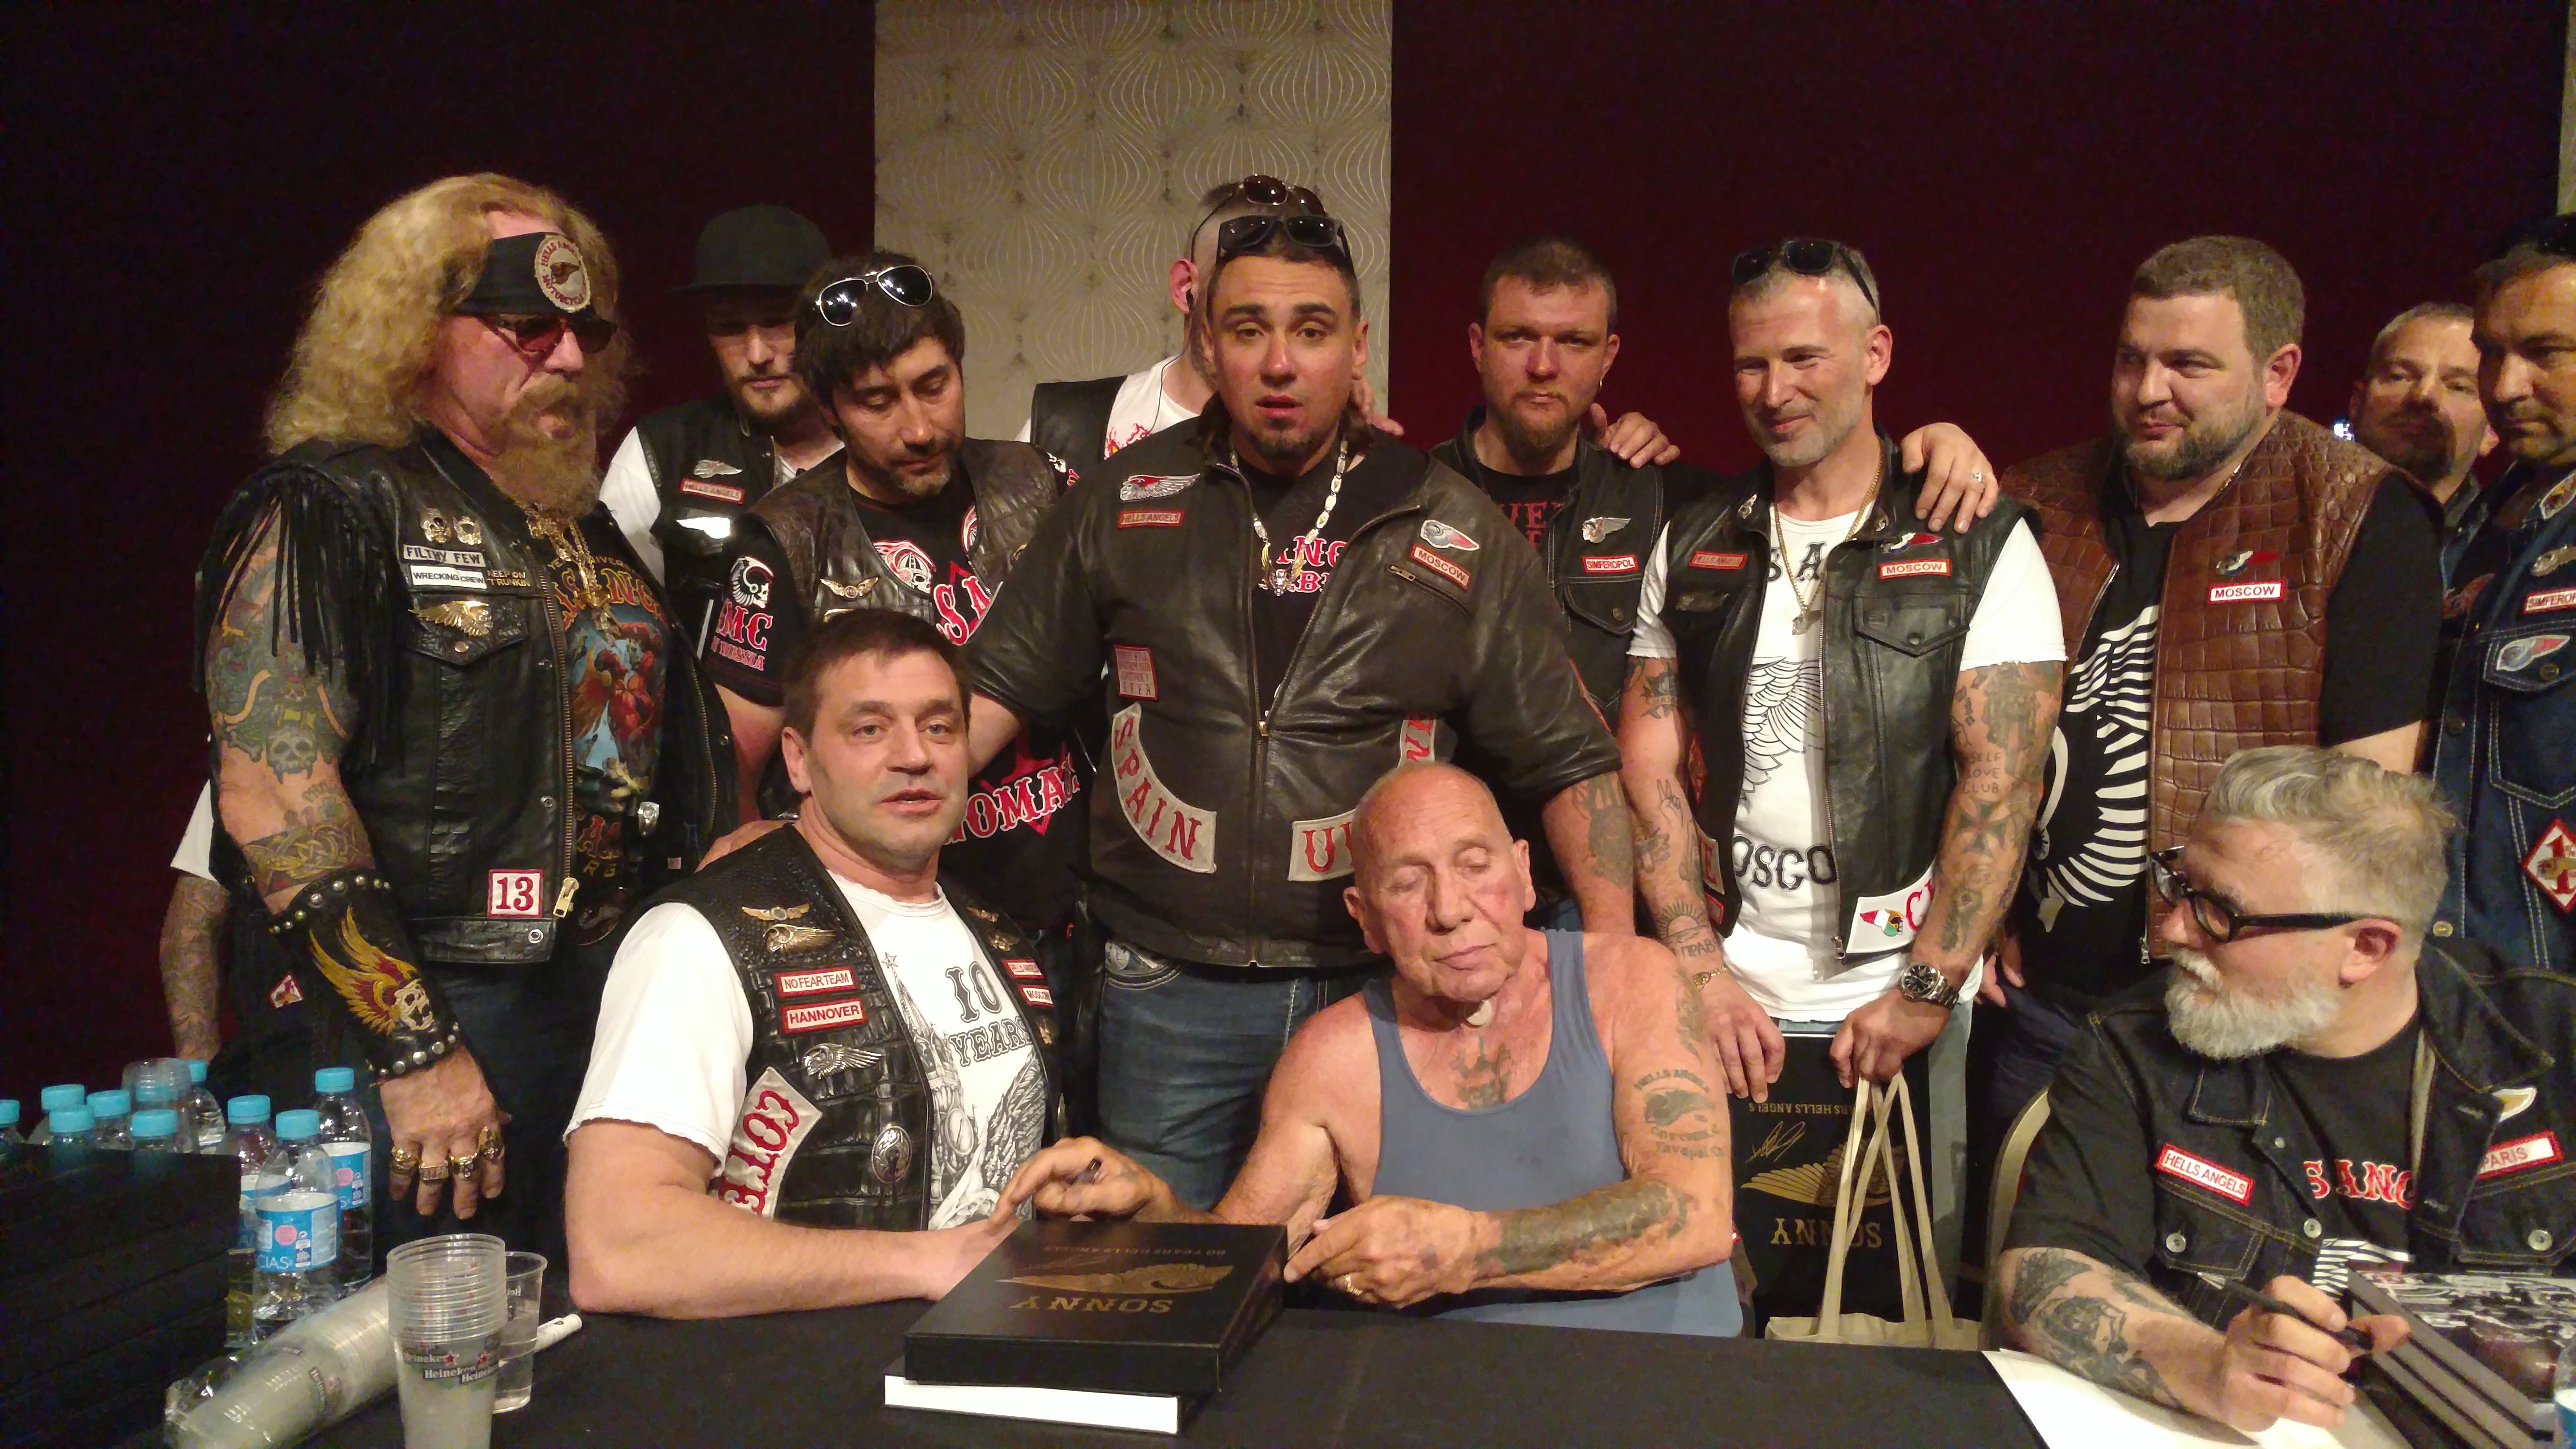 60 ANNIVERSARY Hells Angels MC Moscow.